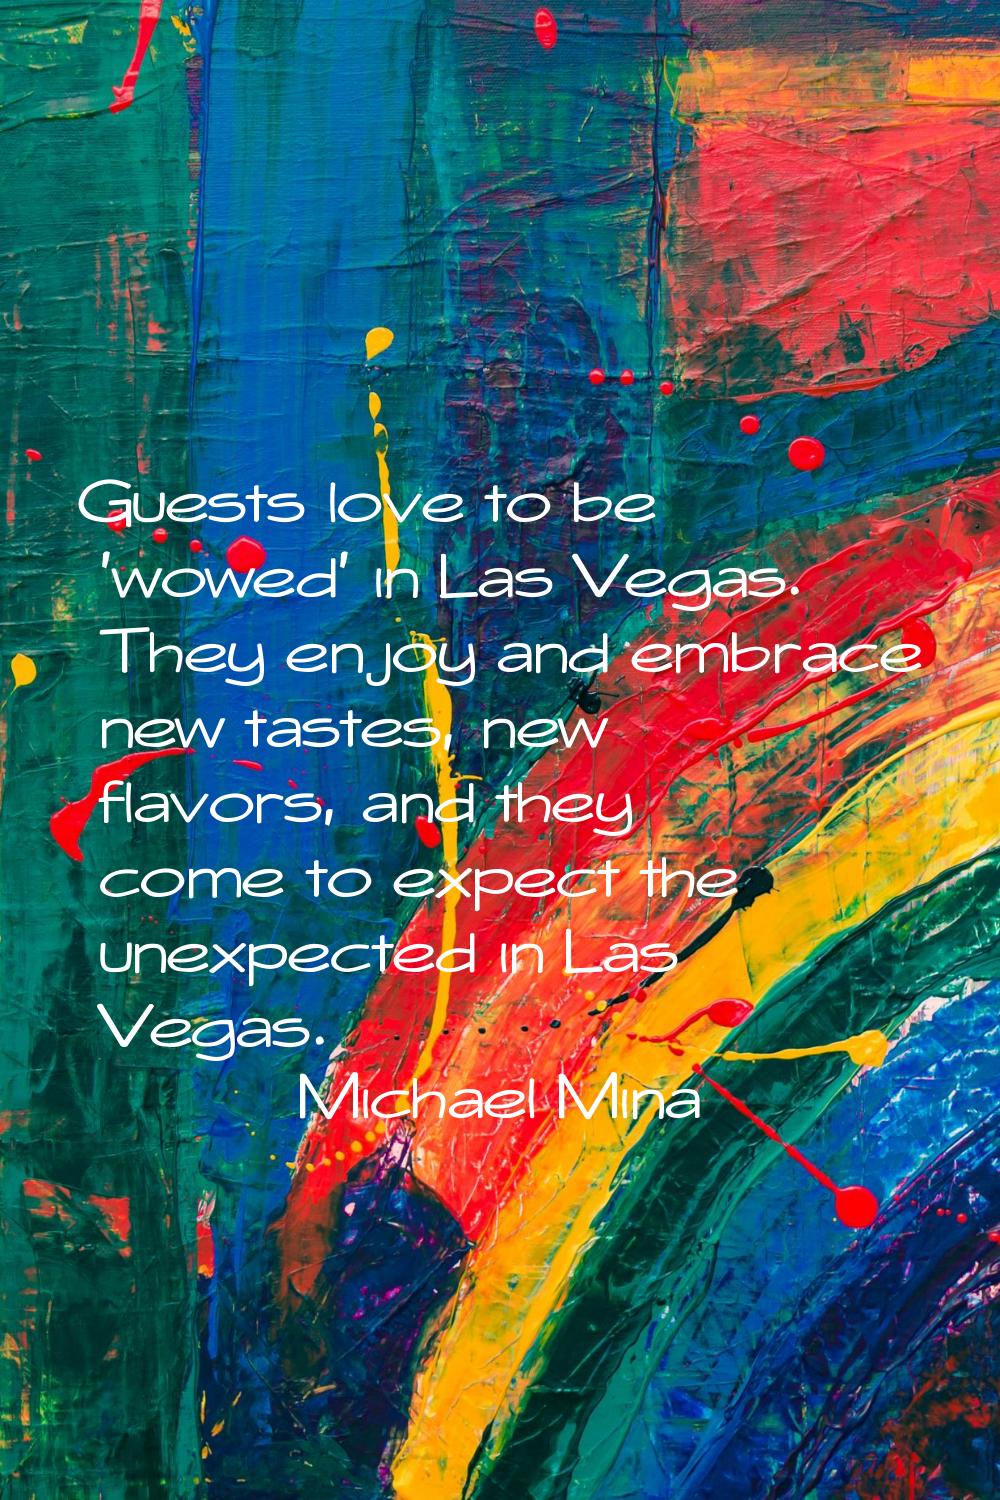 Guests love to be 'wowed' in Las Vegas. They enjoy and embrace new tastes, new flavors, and they co